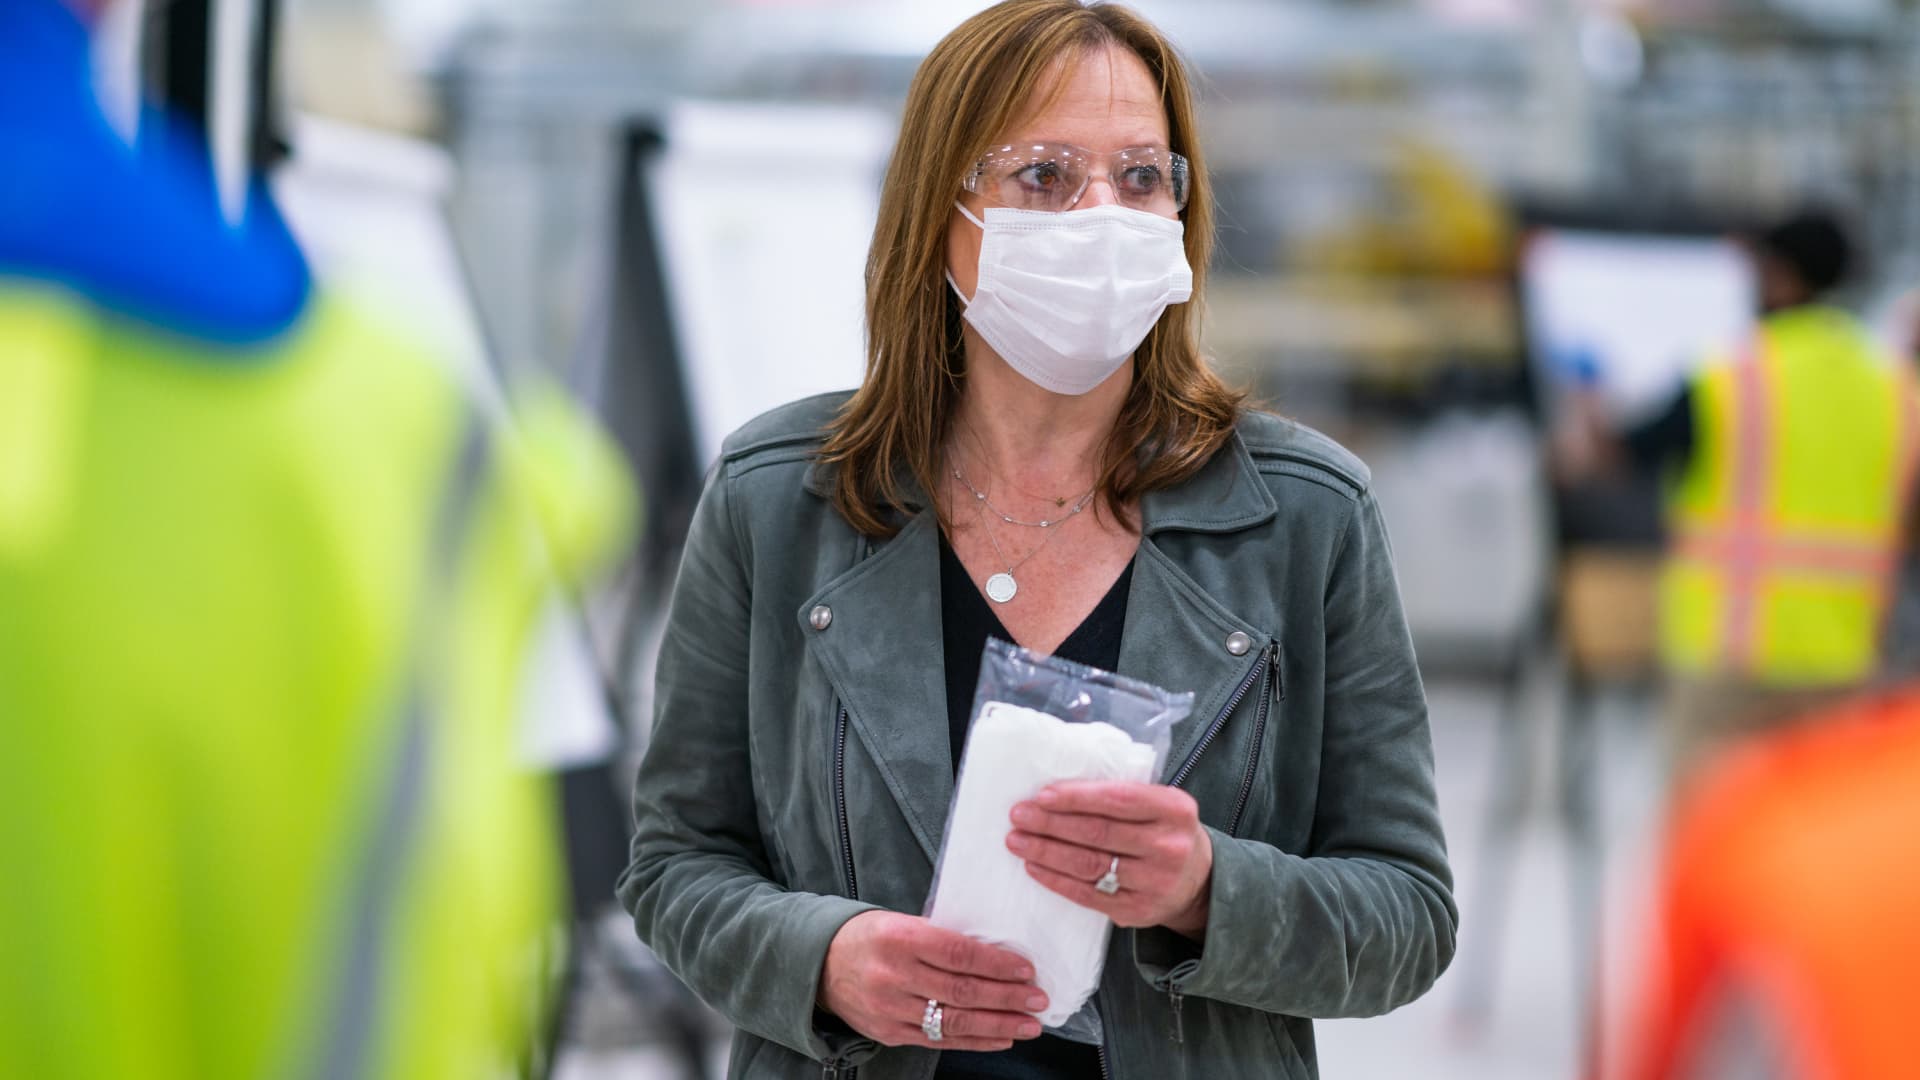 General Motors Chairman and CEO Mary Barra on April 1, 2020 tours one of the company's facilities in Warren, Michigan that will produce Level 1 face masks.